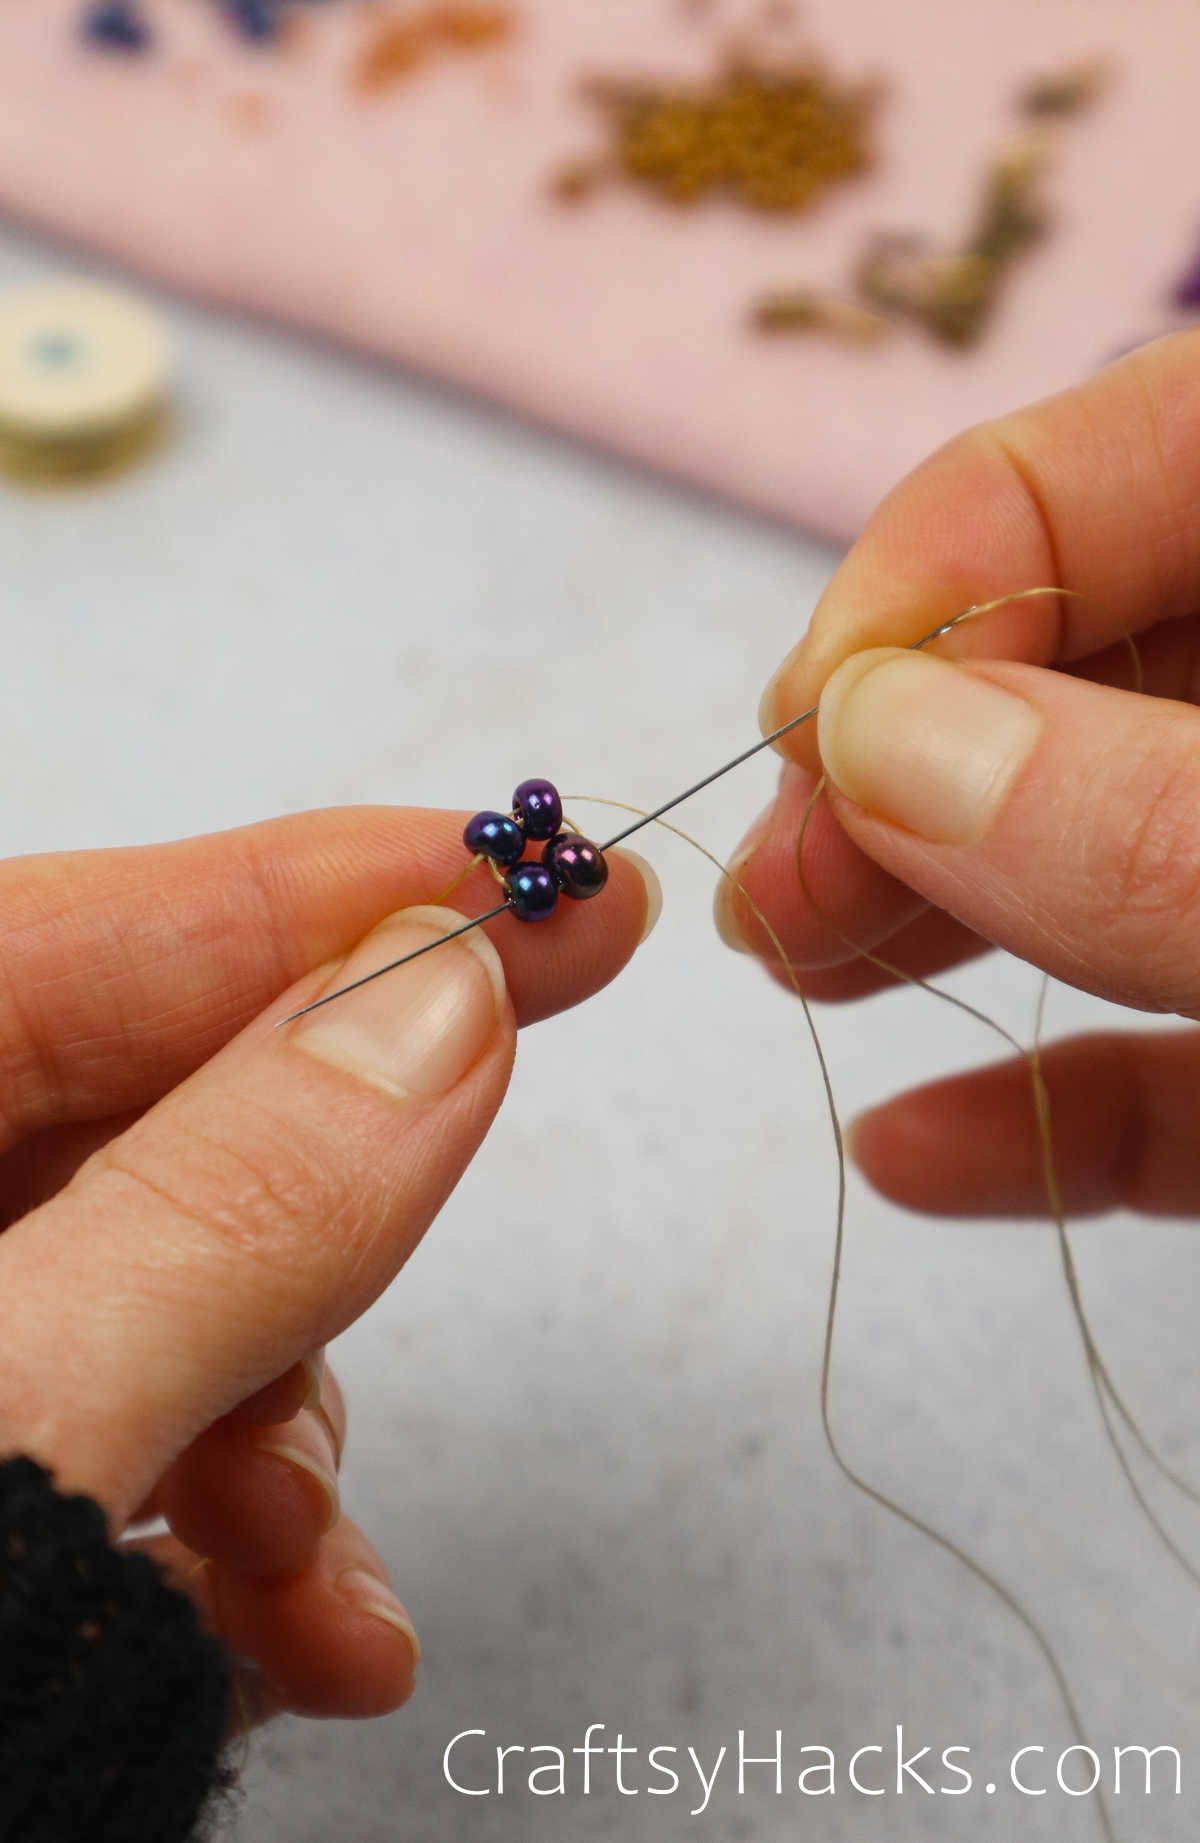 looping the needle through the beads